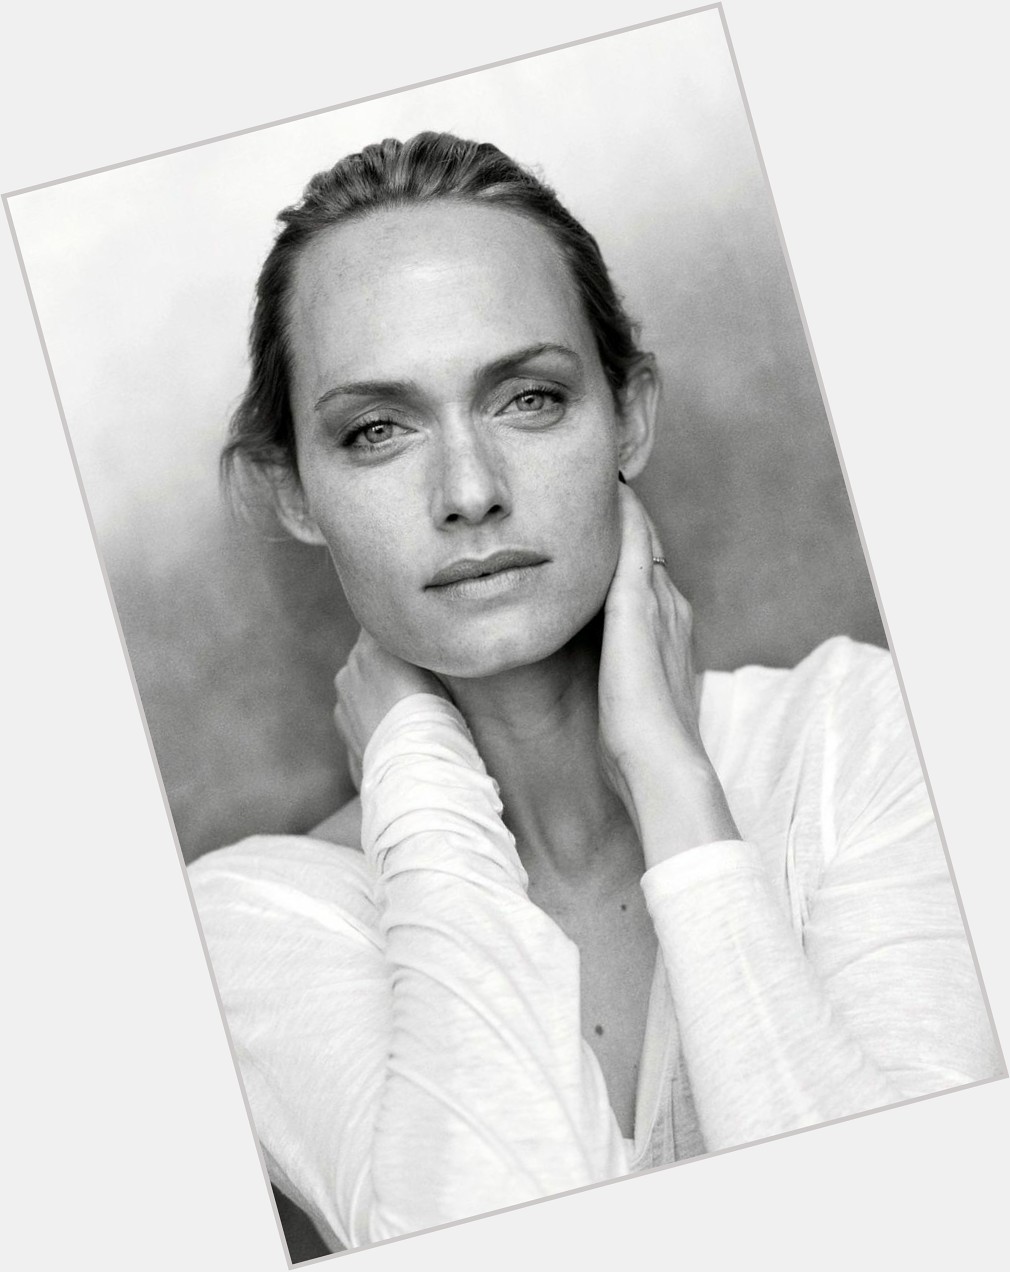 Happy birthday to the coolest model Amber Valletta 